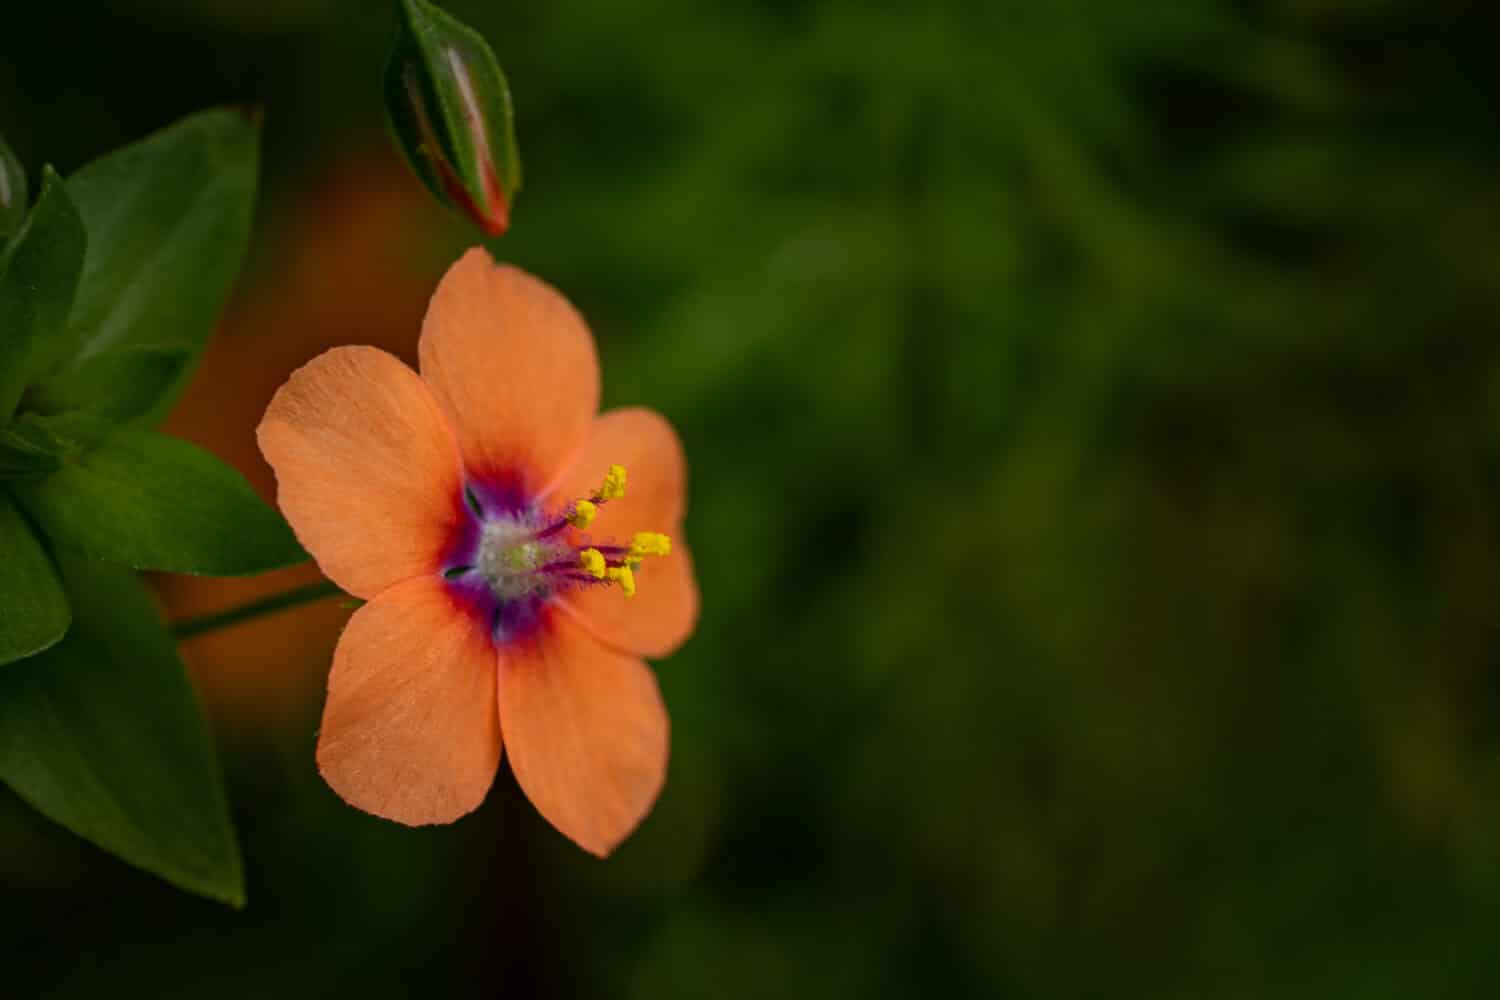 A closeup of a scarlet pimpernel in a field under the sunlight with a blurry background